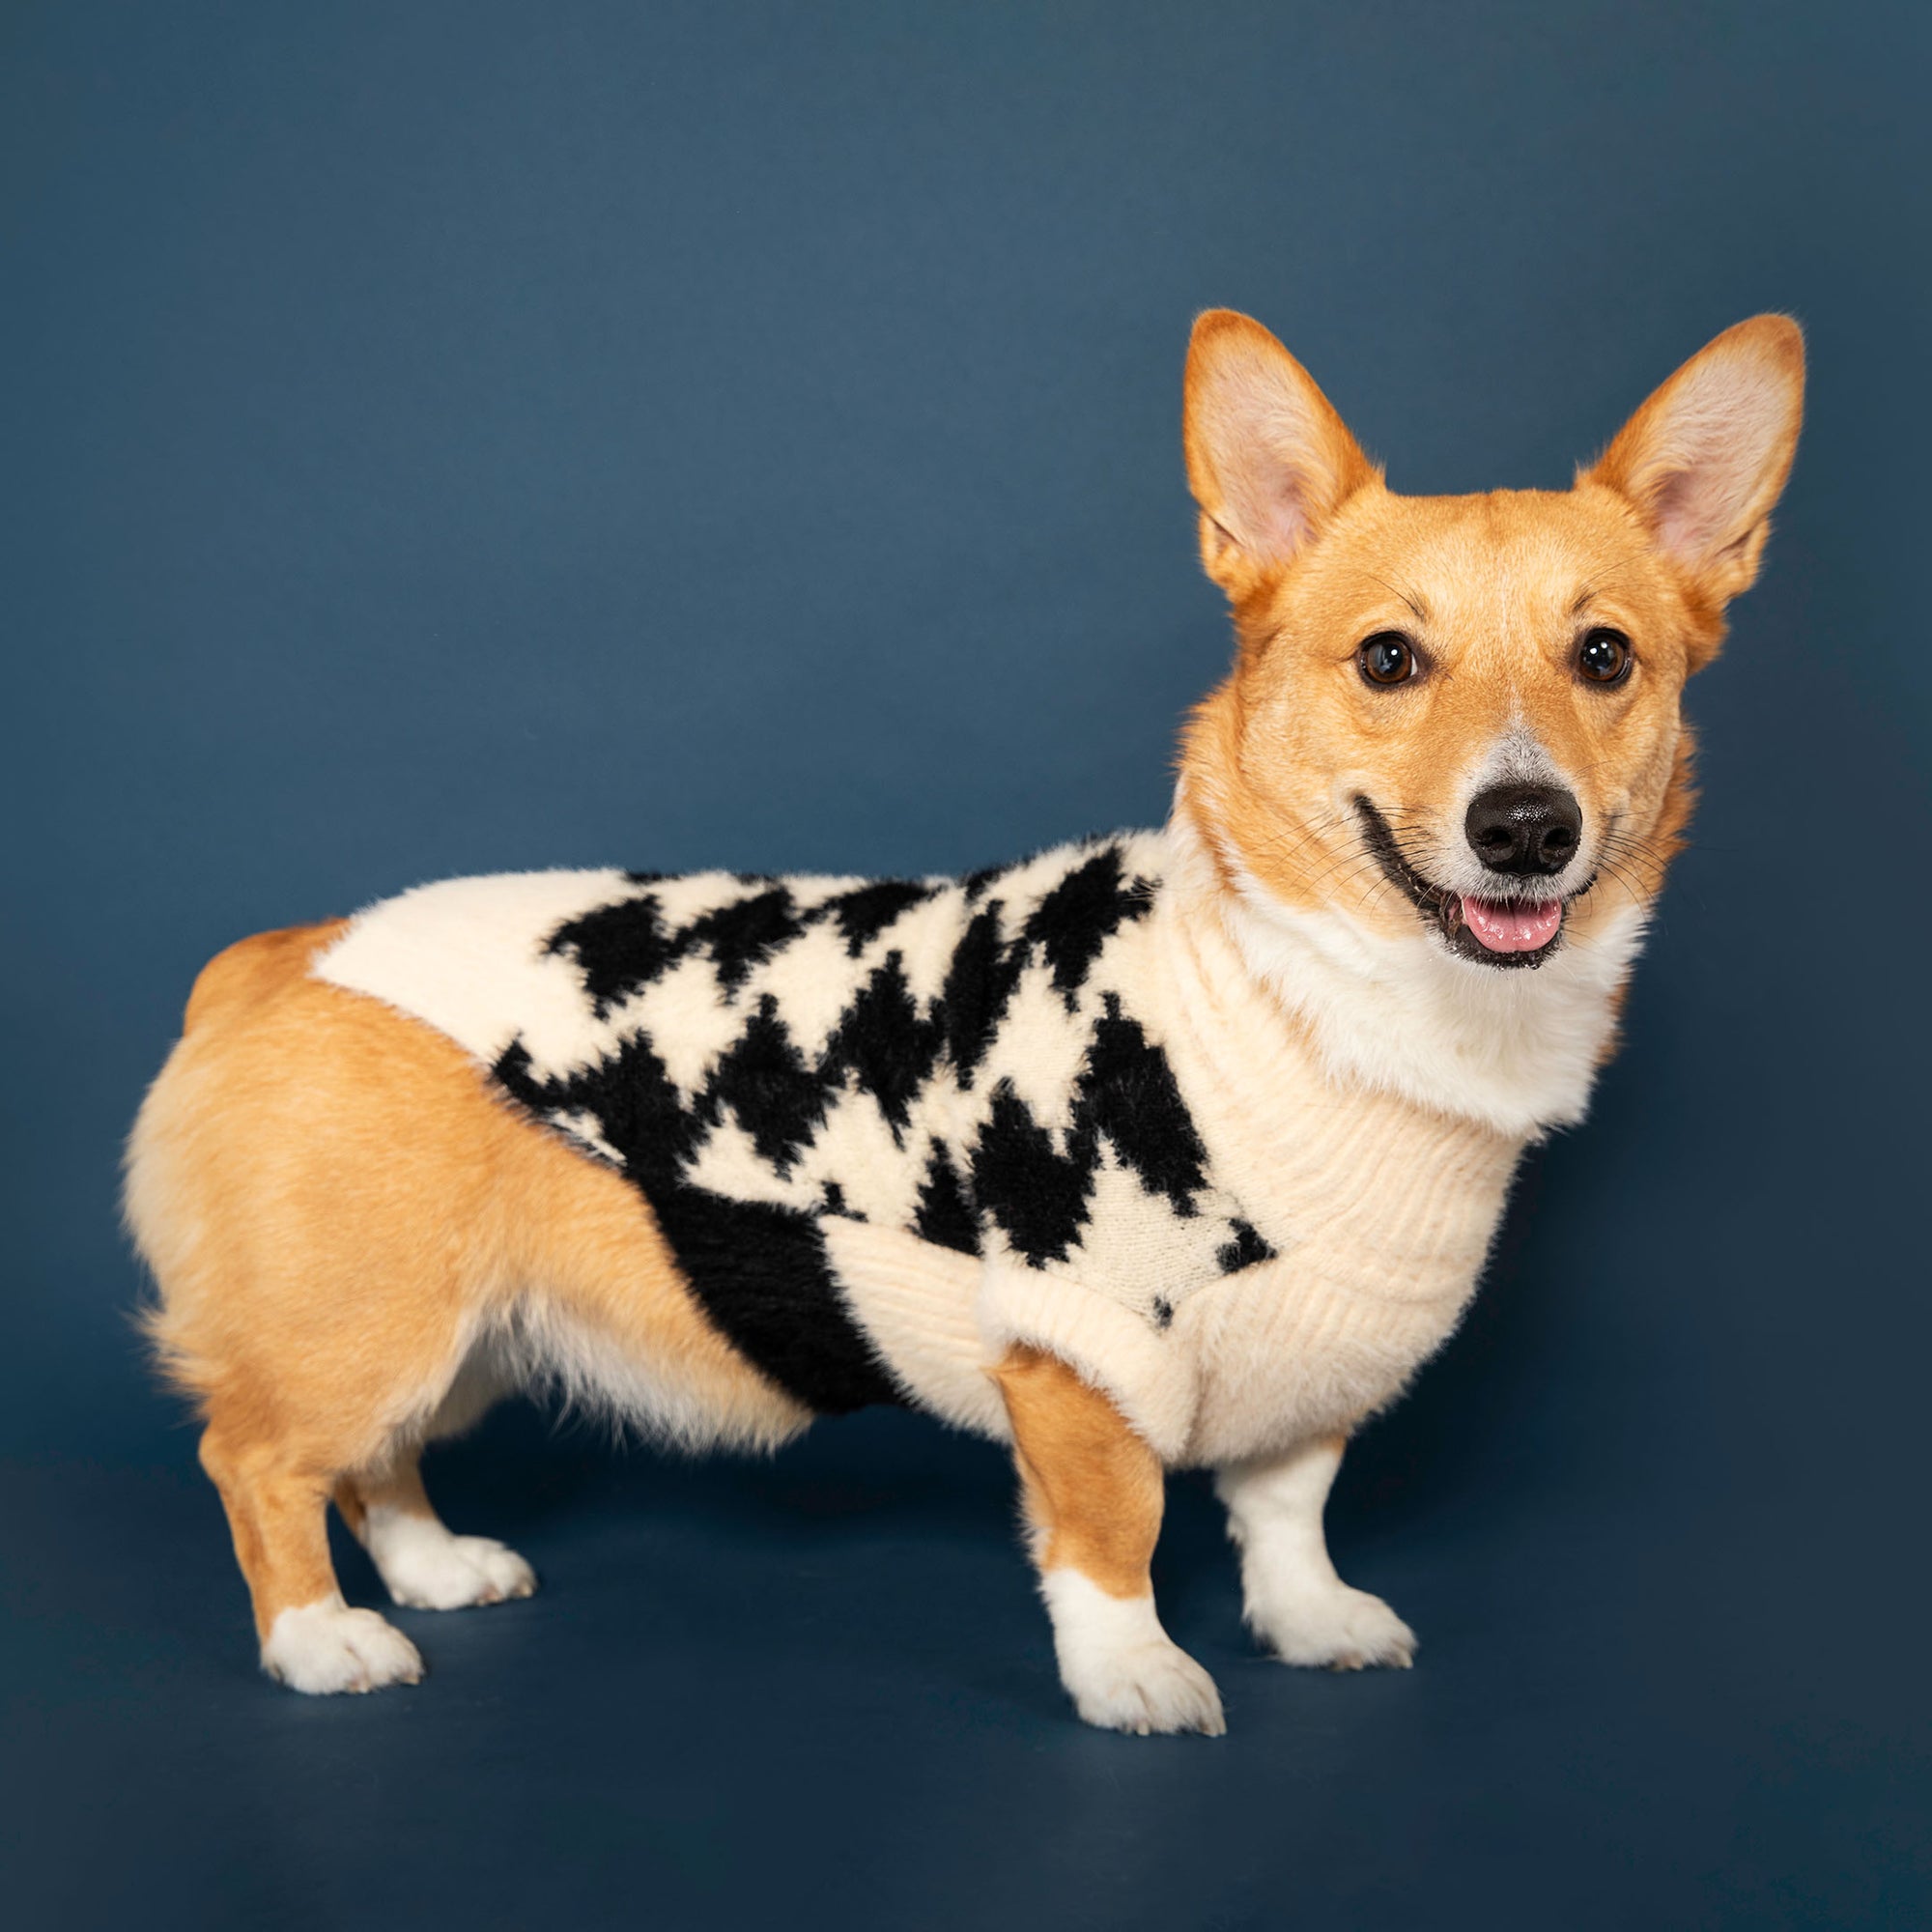 Smiling Corgi dog proudly wearing a beige and black houndstooth sweater, posing with a confident stance against a blue background.